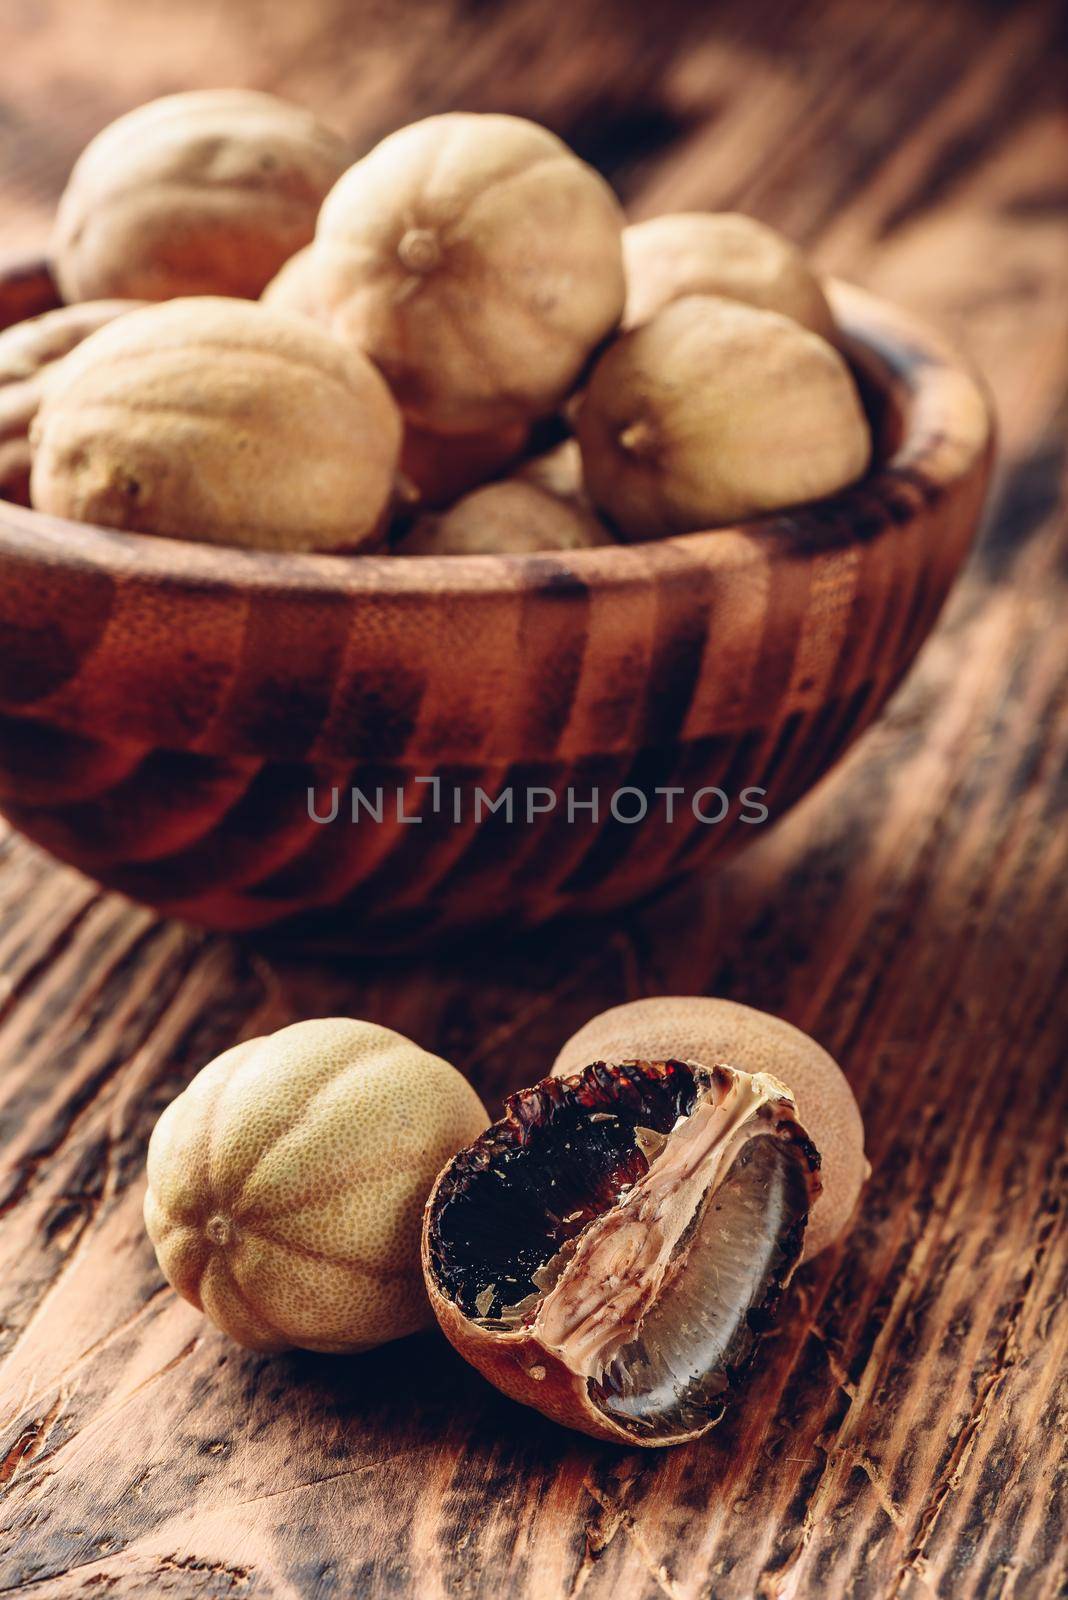 Dried limes on wooden table by Seva_blsv